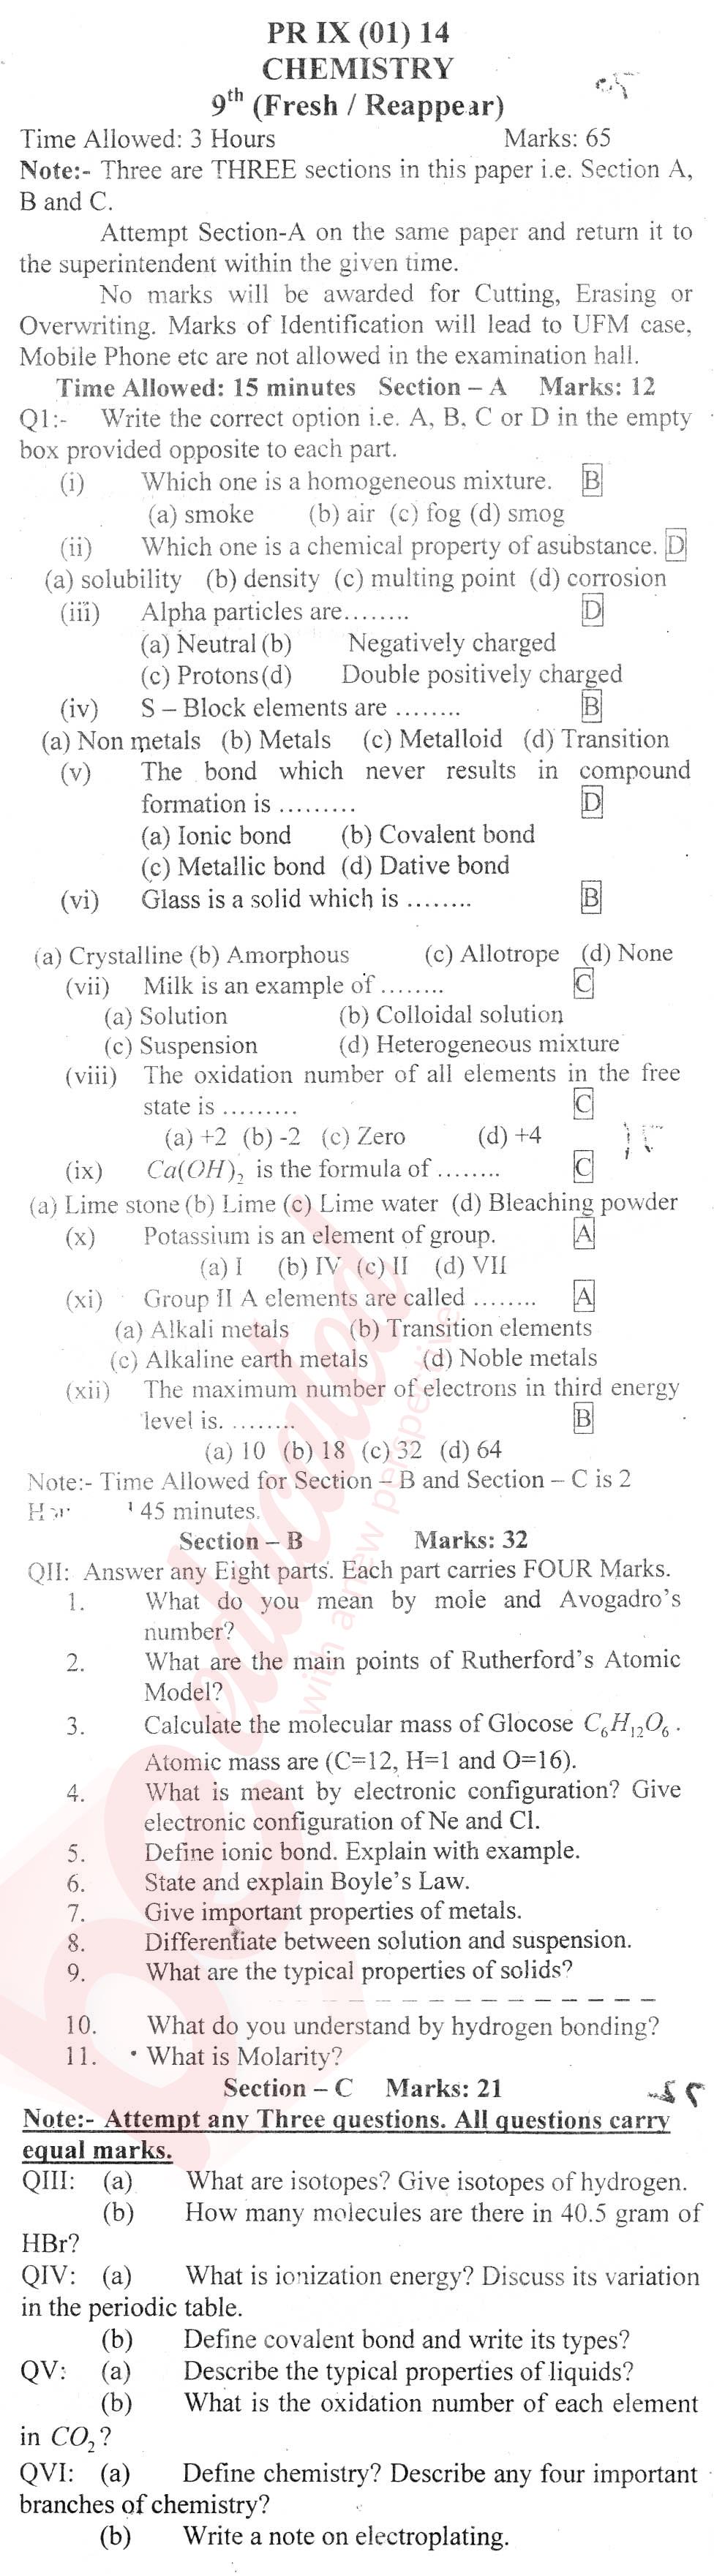 Chemistry 9th English Medium Past Paper Group 1 BISE Bannu 2014